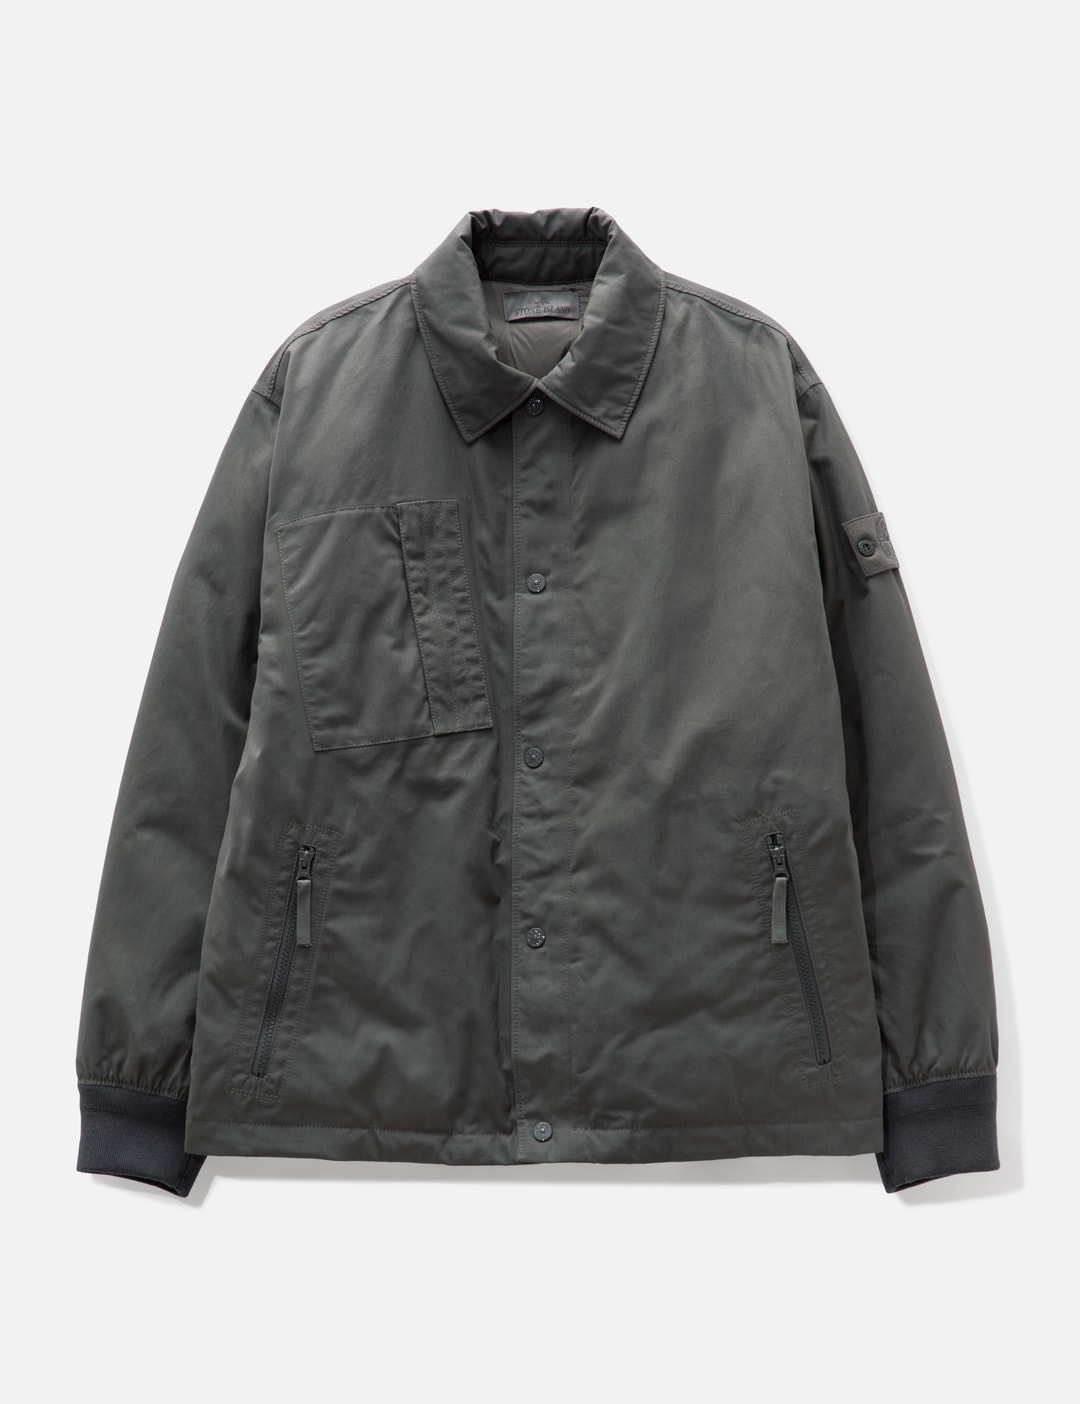 Stone Island - O-VENTILE® Down Shirt Jacket | HBX - Globally Curated ...